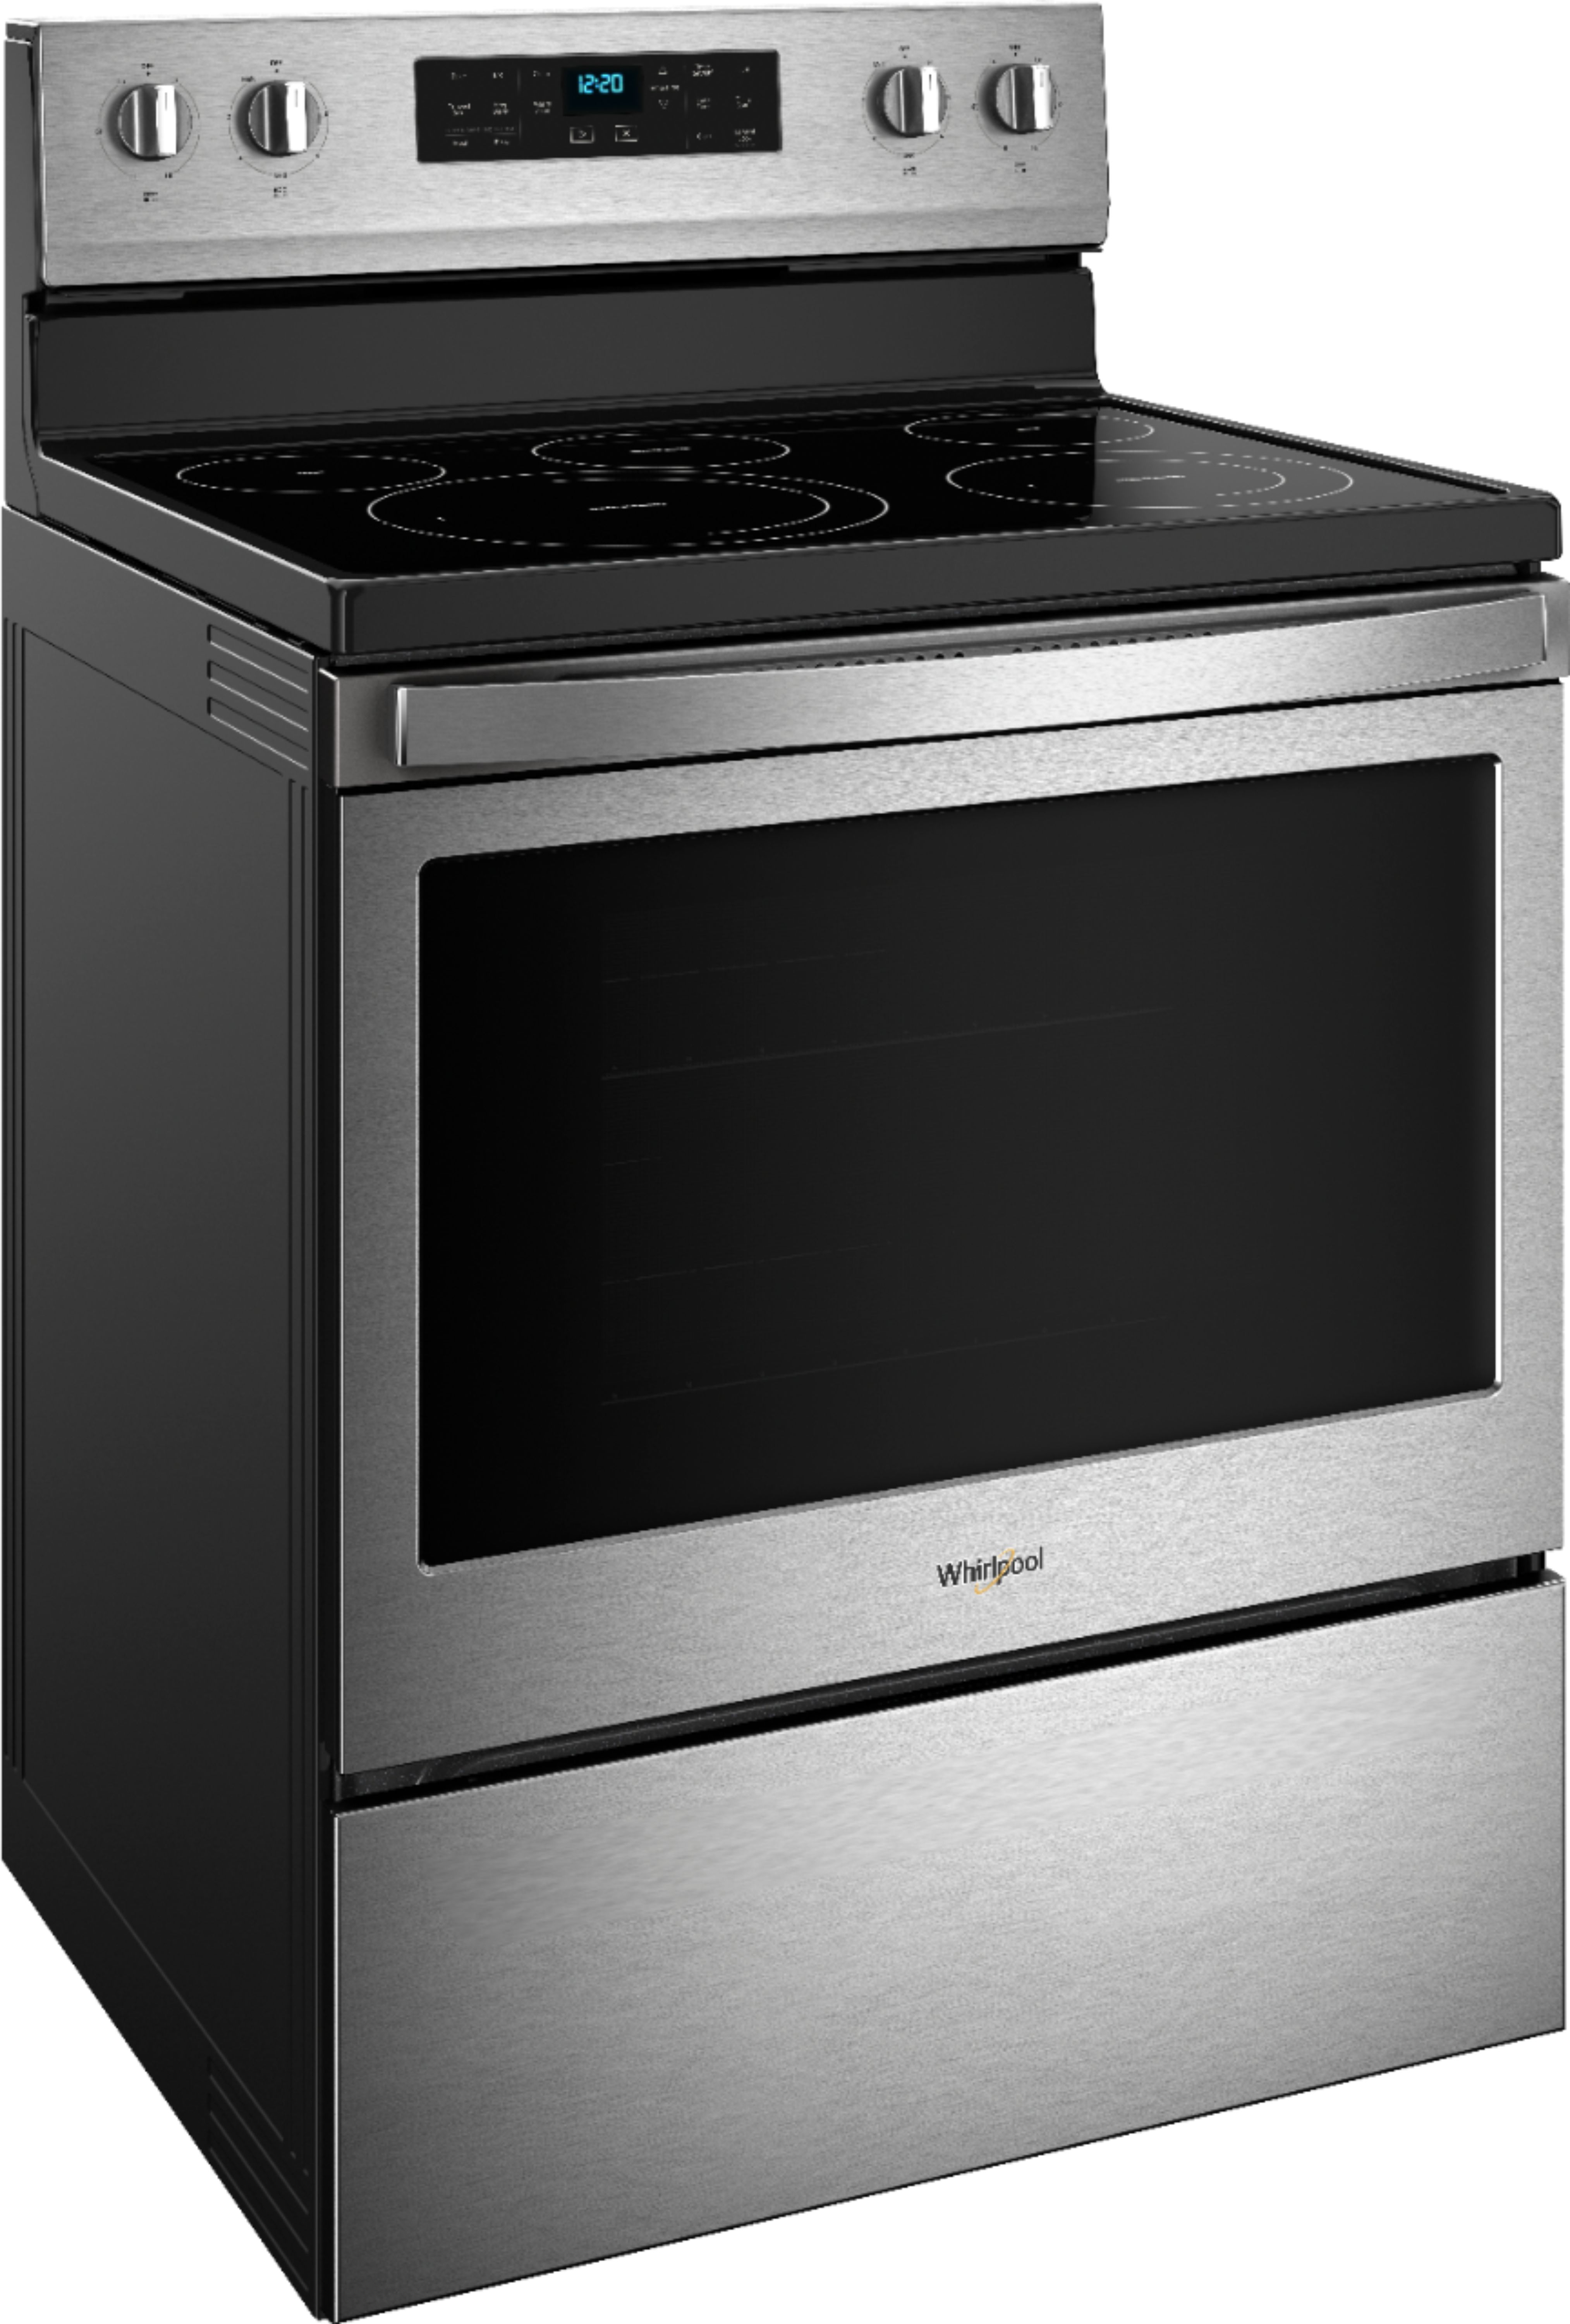 Questions and Answers: Whirlpool 5.3 Cu. Ft. Freestanding Electric ...